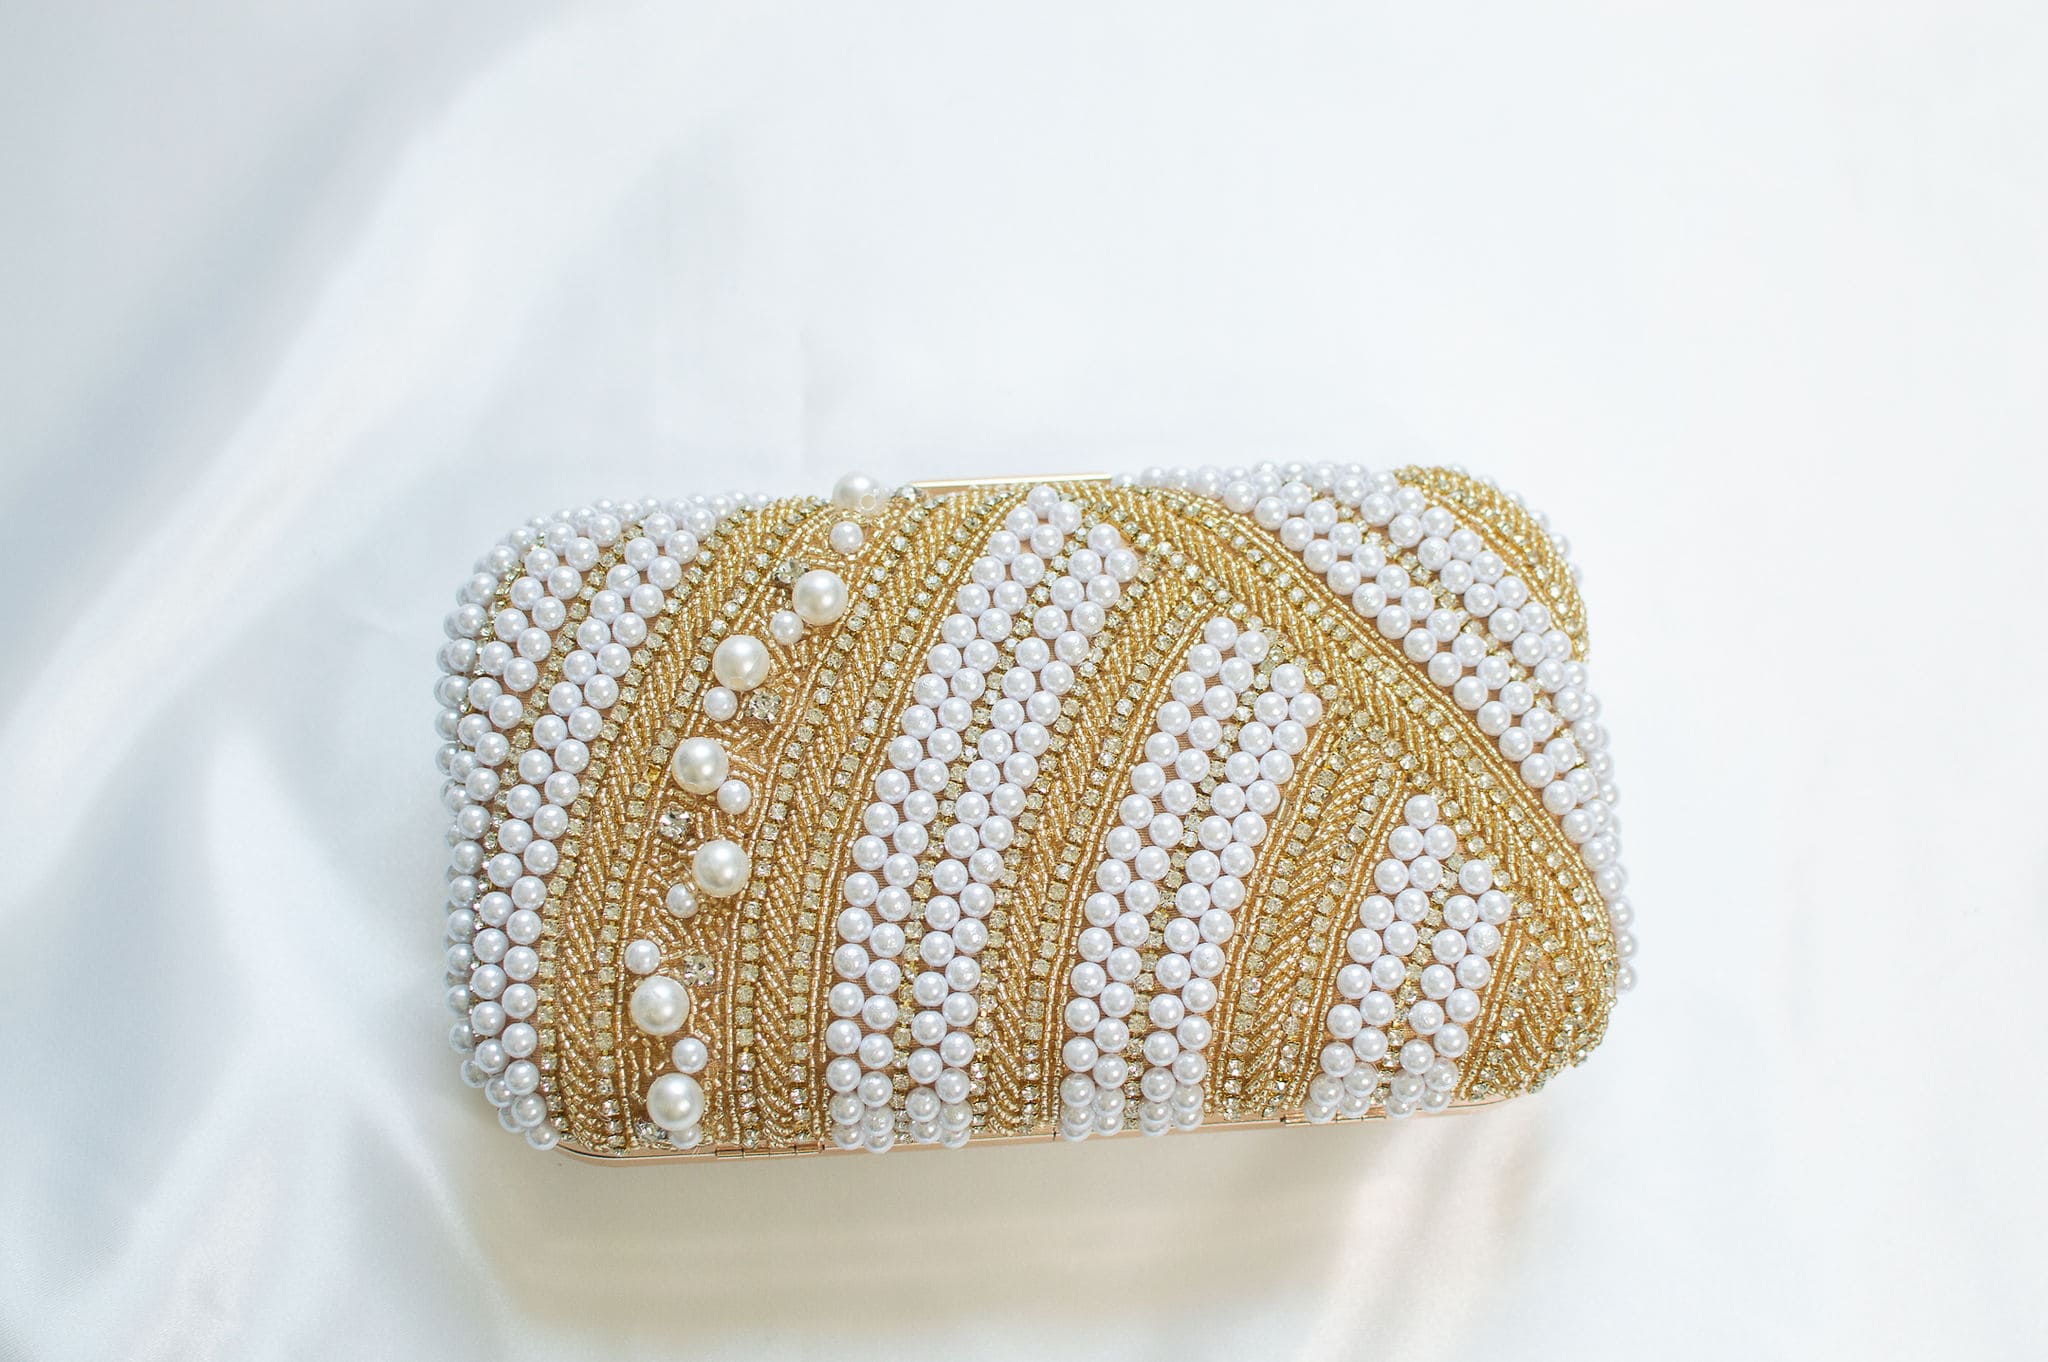 Handmade Indian Clutch Purse For Weddings, Clutches for Wedding